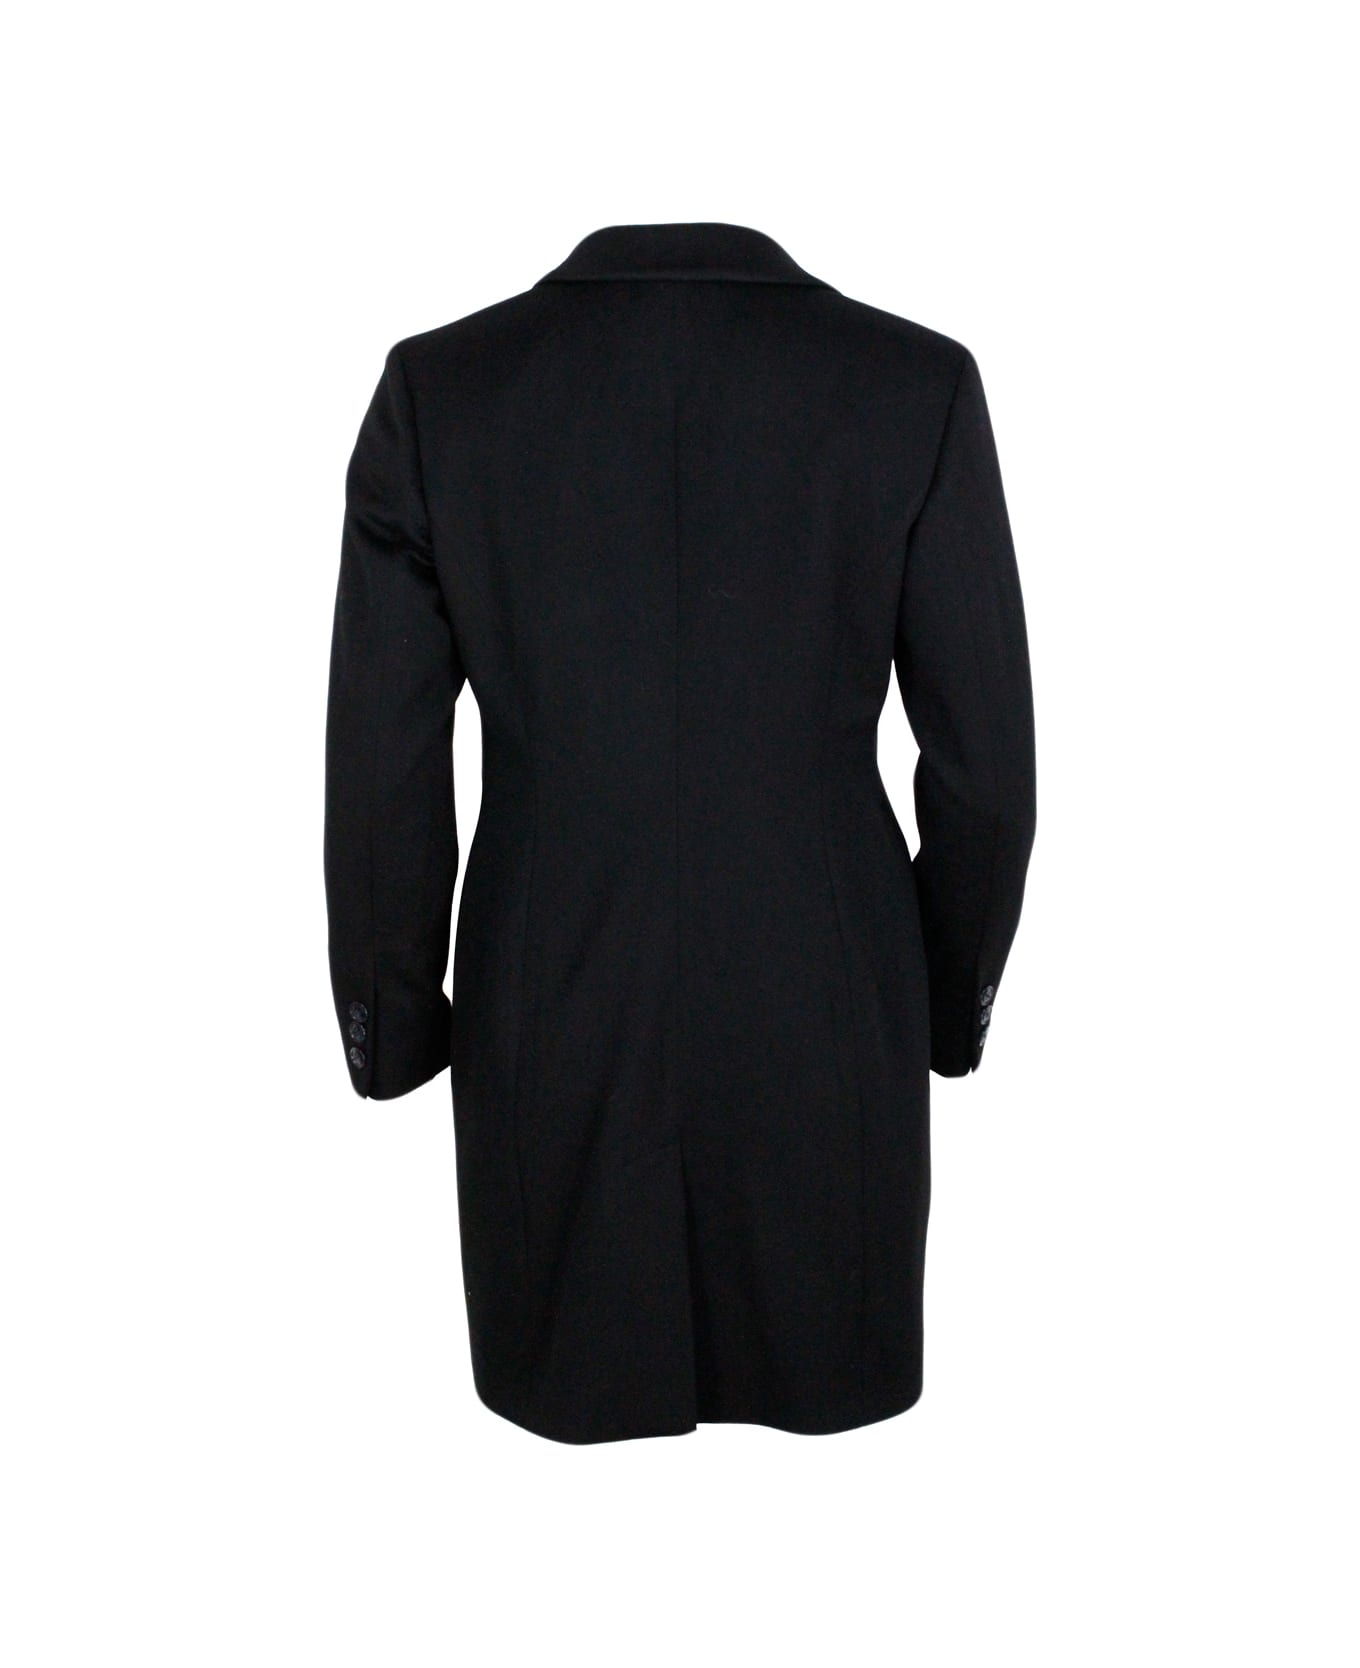 Barba Napoli Single-breasted Coat Made Of Soft And Precious Cashmere With Flap Pockets And Button Closure. Matching Inner Lining. Side By Side Slim Line - Black